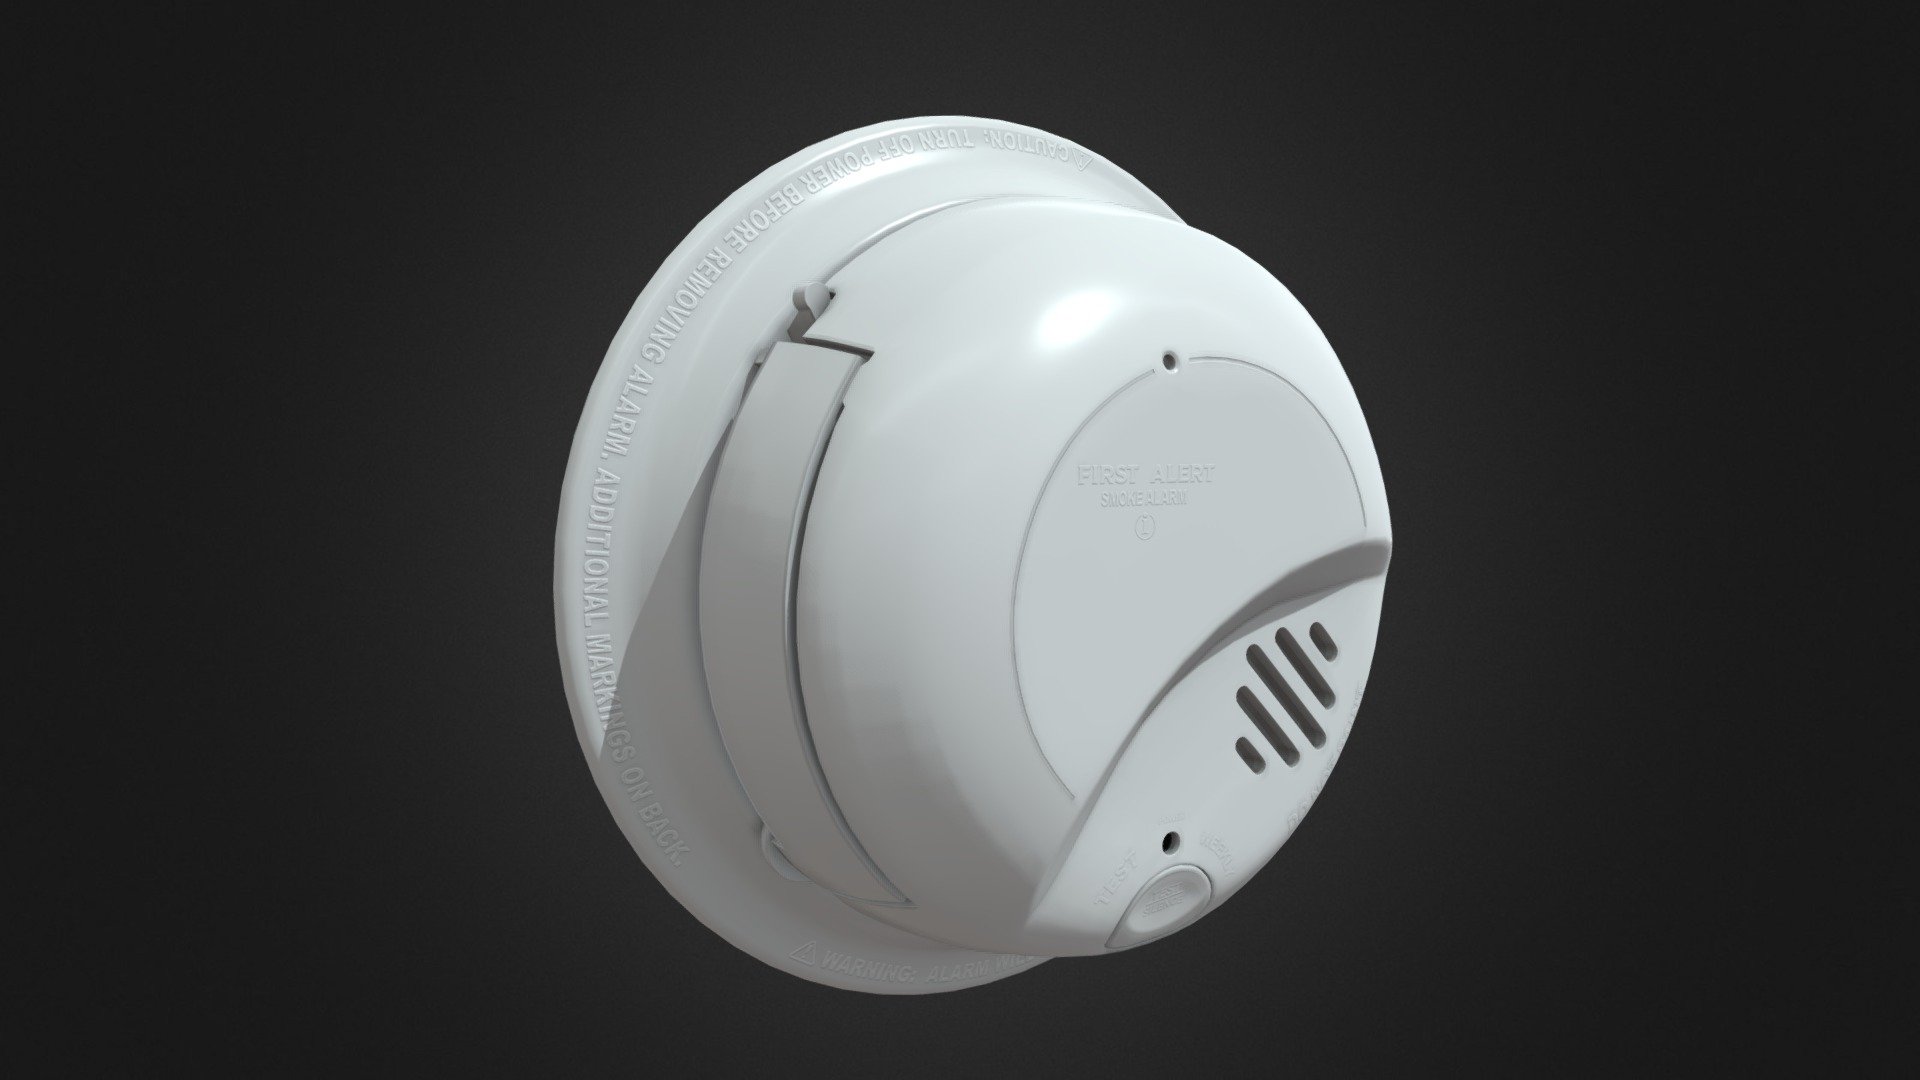 Smoke Detector
The model has an optimized low poly mesh with the greatest possible number of simplifications that do not affect photo-realism but can help to simplify it, thus lightening your scene and allowing for using this model in real-time 3d applications.

Real-world accurate model.  In this product, all objects are ERROR-FREE and All LEGAL Geometry. Subdivisions are not required for this product.

Perfect for Architectural, Product visualization, Game Engine, and VR (Virtual Reality) No Plugin Needed.

Format Type




3ds Max 2017 (standard shader)

FBX

OBJ

3DS

Texture

2 multi/sub material used. 2 different sets of textures:




Diffuse

Normal

Specular

Gloss

Specular n Gloss [.tga additional texture]

You might need to re-assign textures map to model in your relevant software - Smoke Detector Machine - Buy Royalty Free 3D model by luxe3dworld 3d model